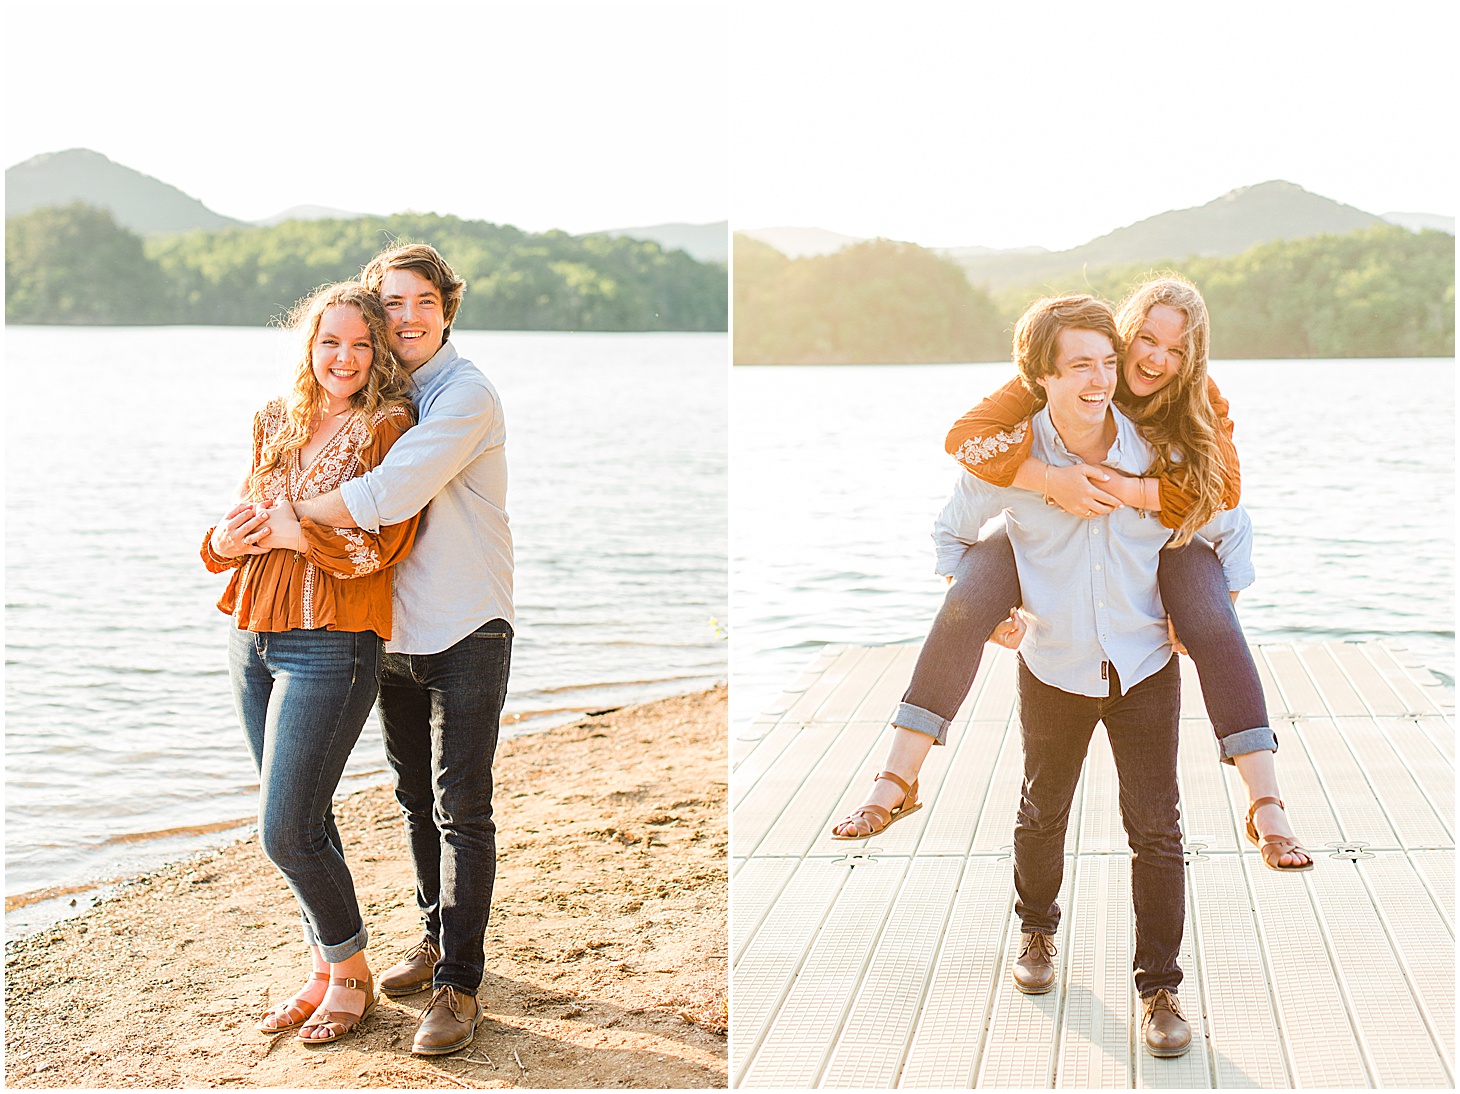 carvinscoveengagementsession_roanokeengagementsession_carvinscove_virginiawedding_virginiaweddingphotographer_vaweddingphotographer_photo_0033.jpg